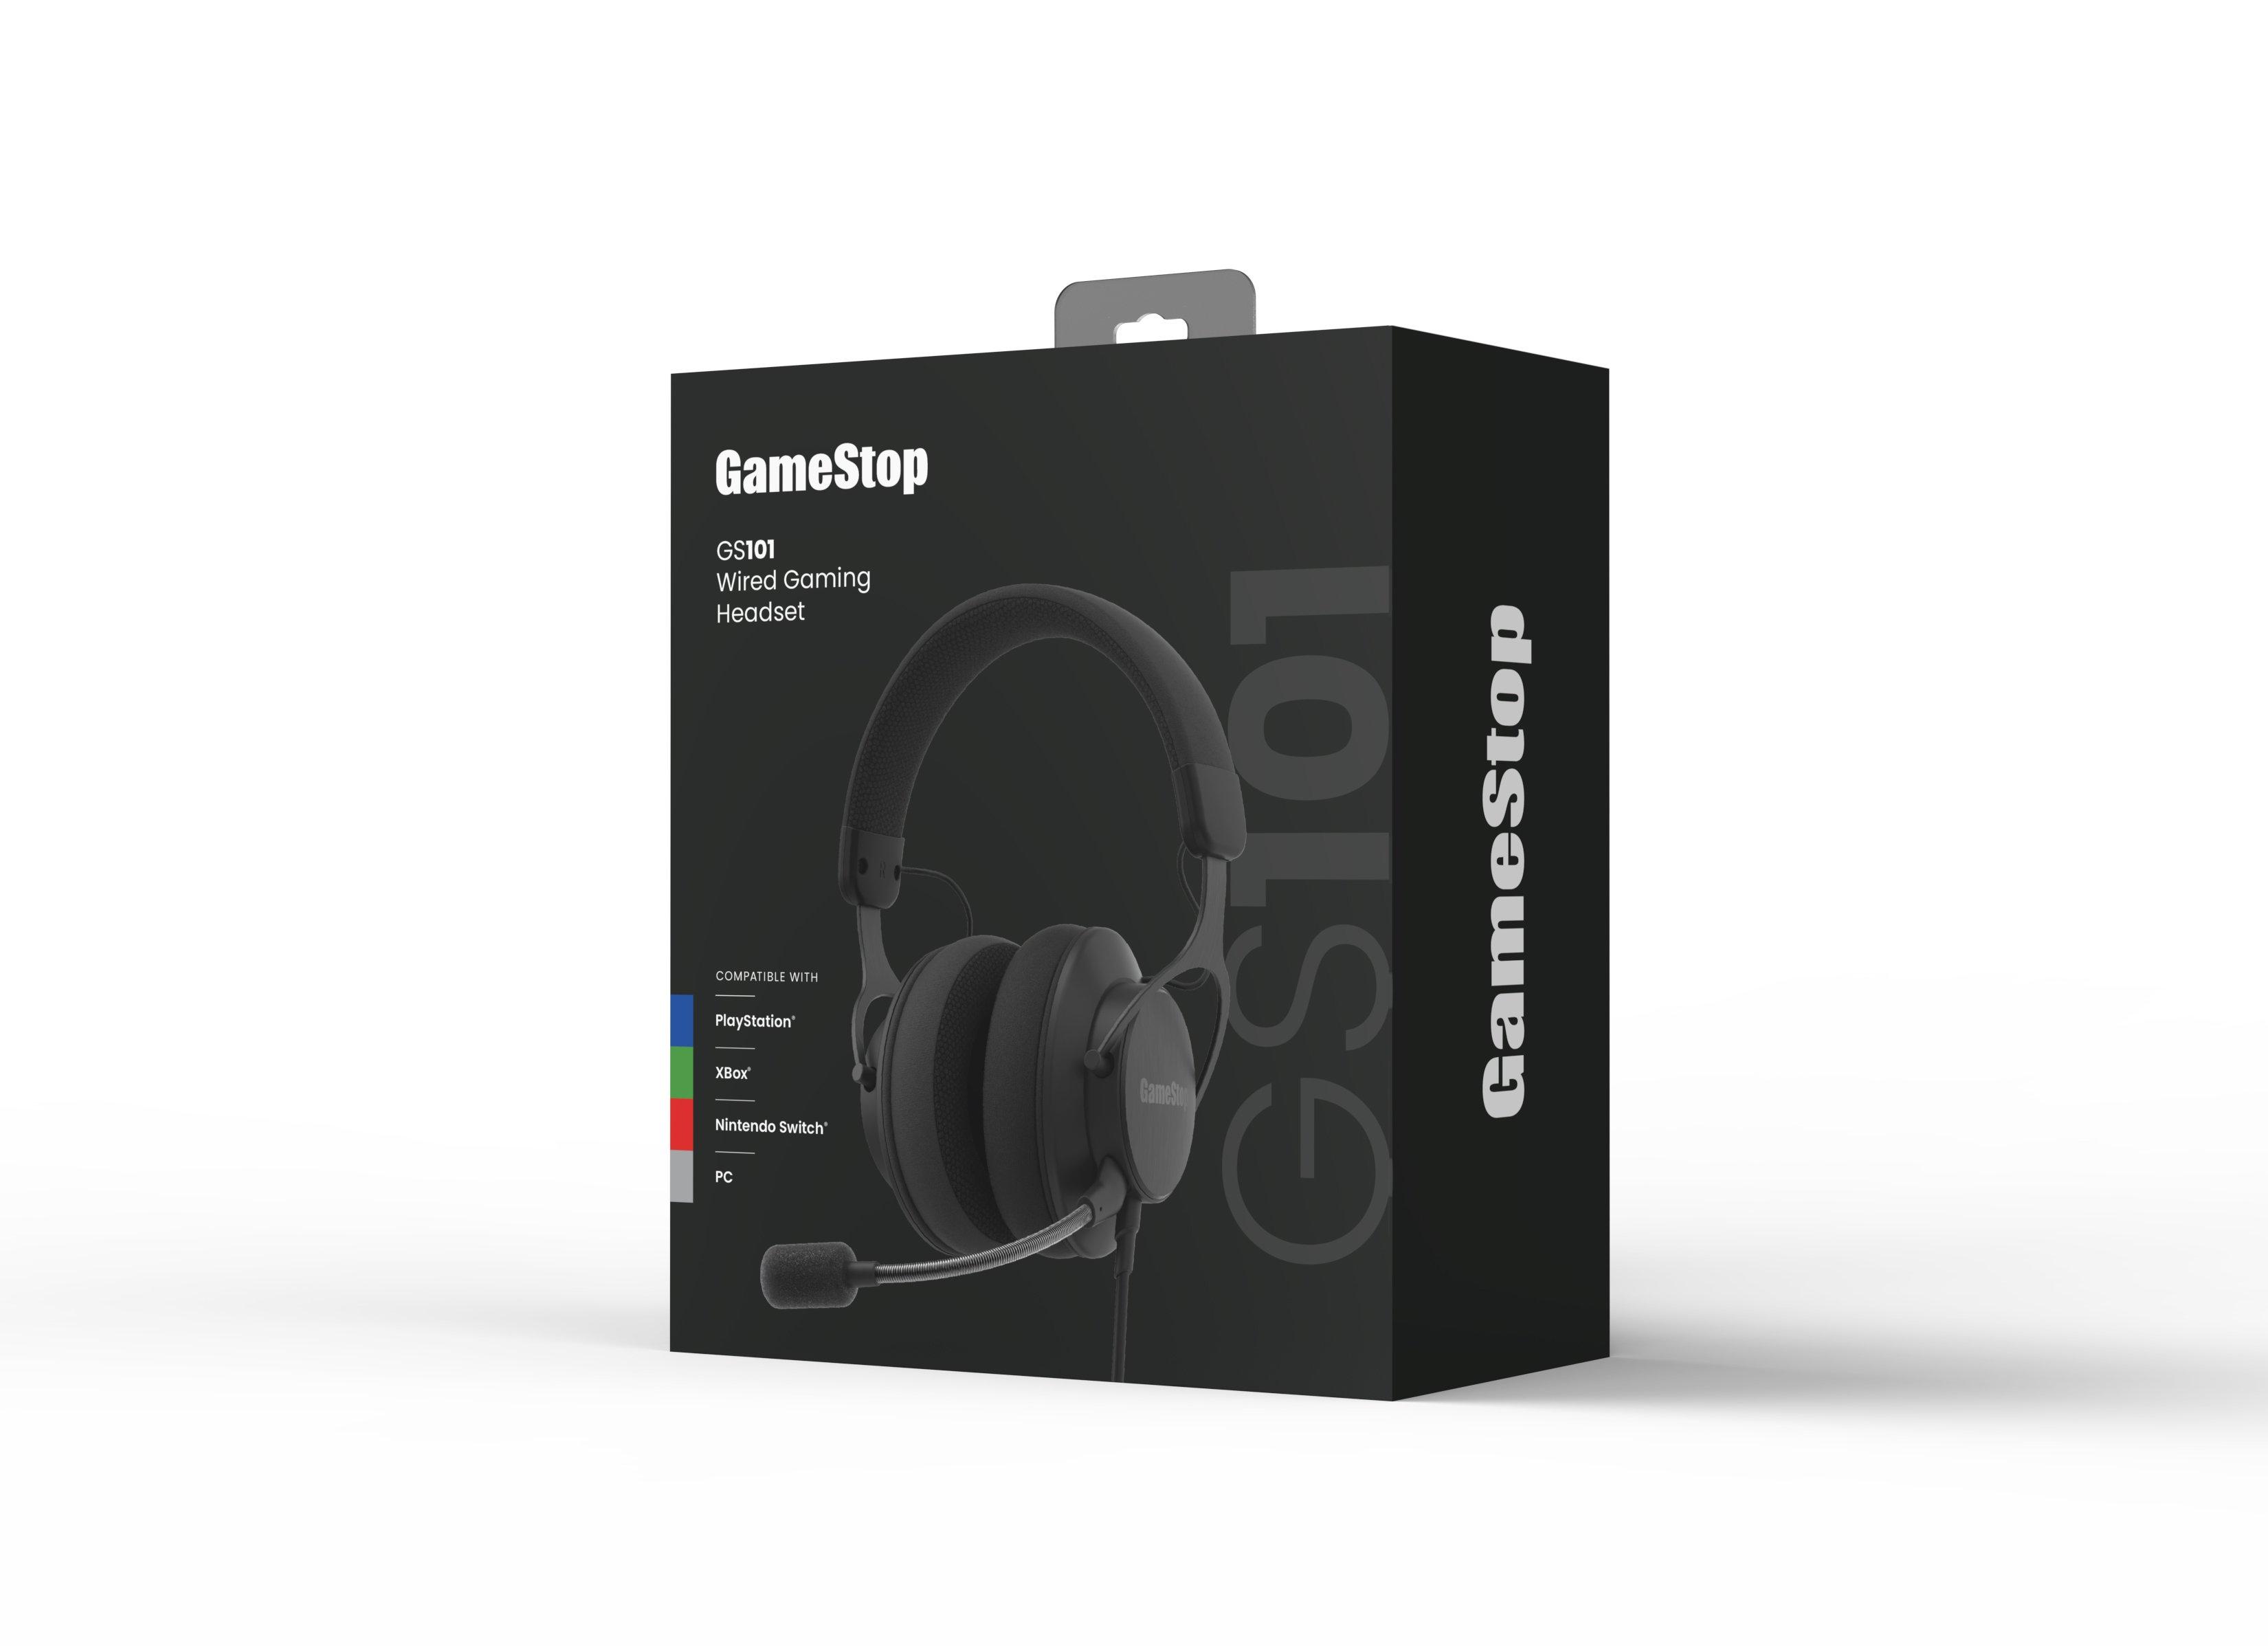 https://media.gamestop.com/i/gamestop/11207544_ALT02/GameStop-GS101-Universal-Gaming-Headset-for-PlayStation-Xbox-Nintendo-Switch-and-PC?$pdp$